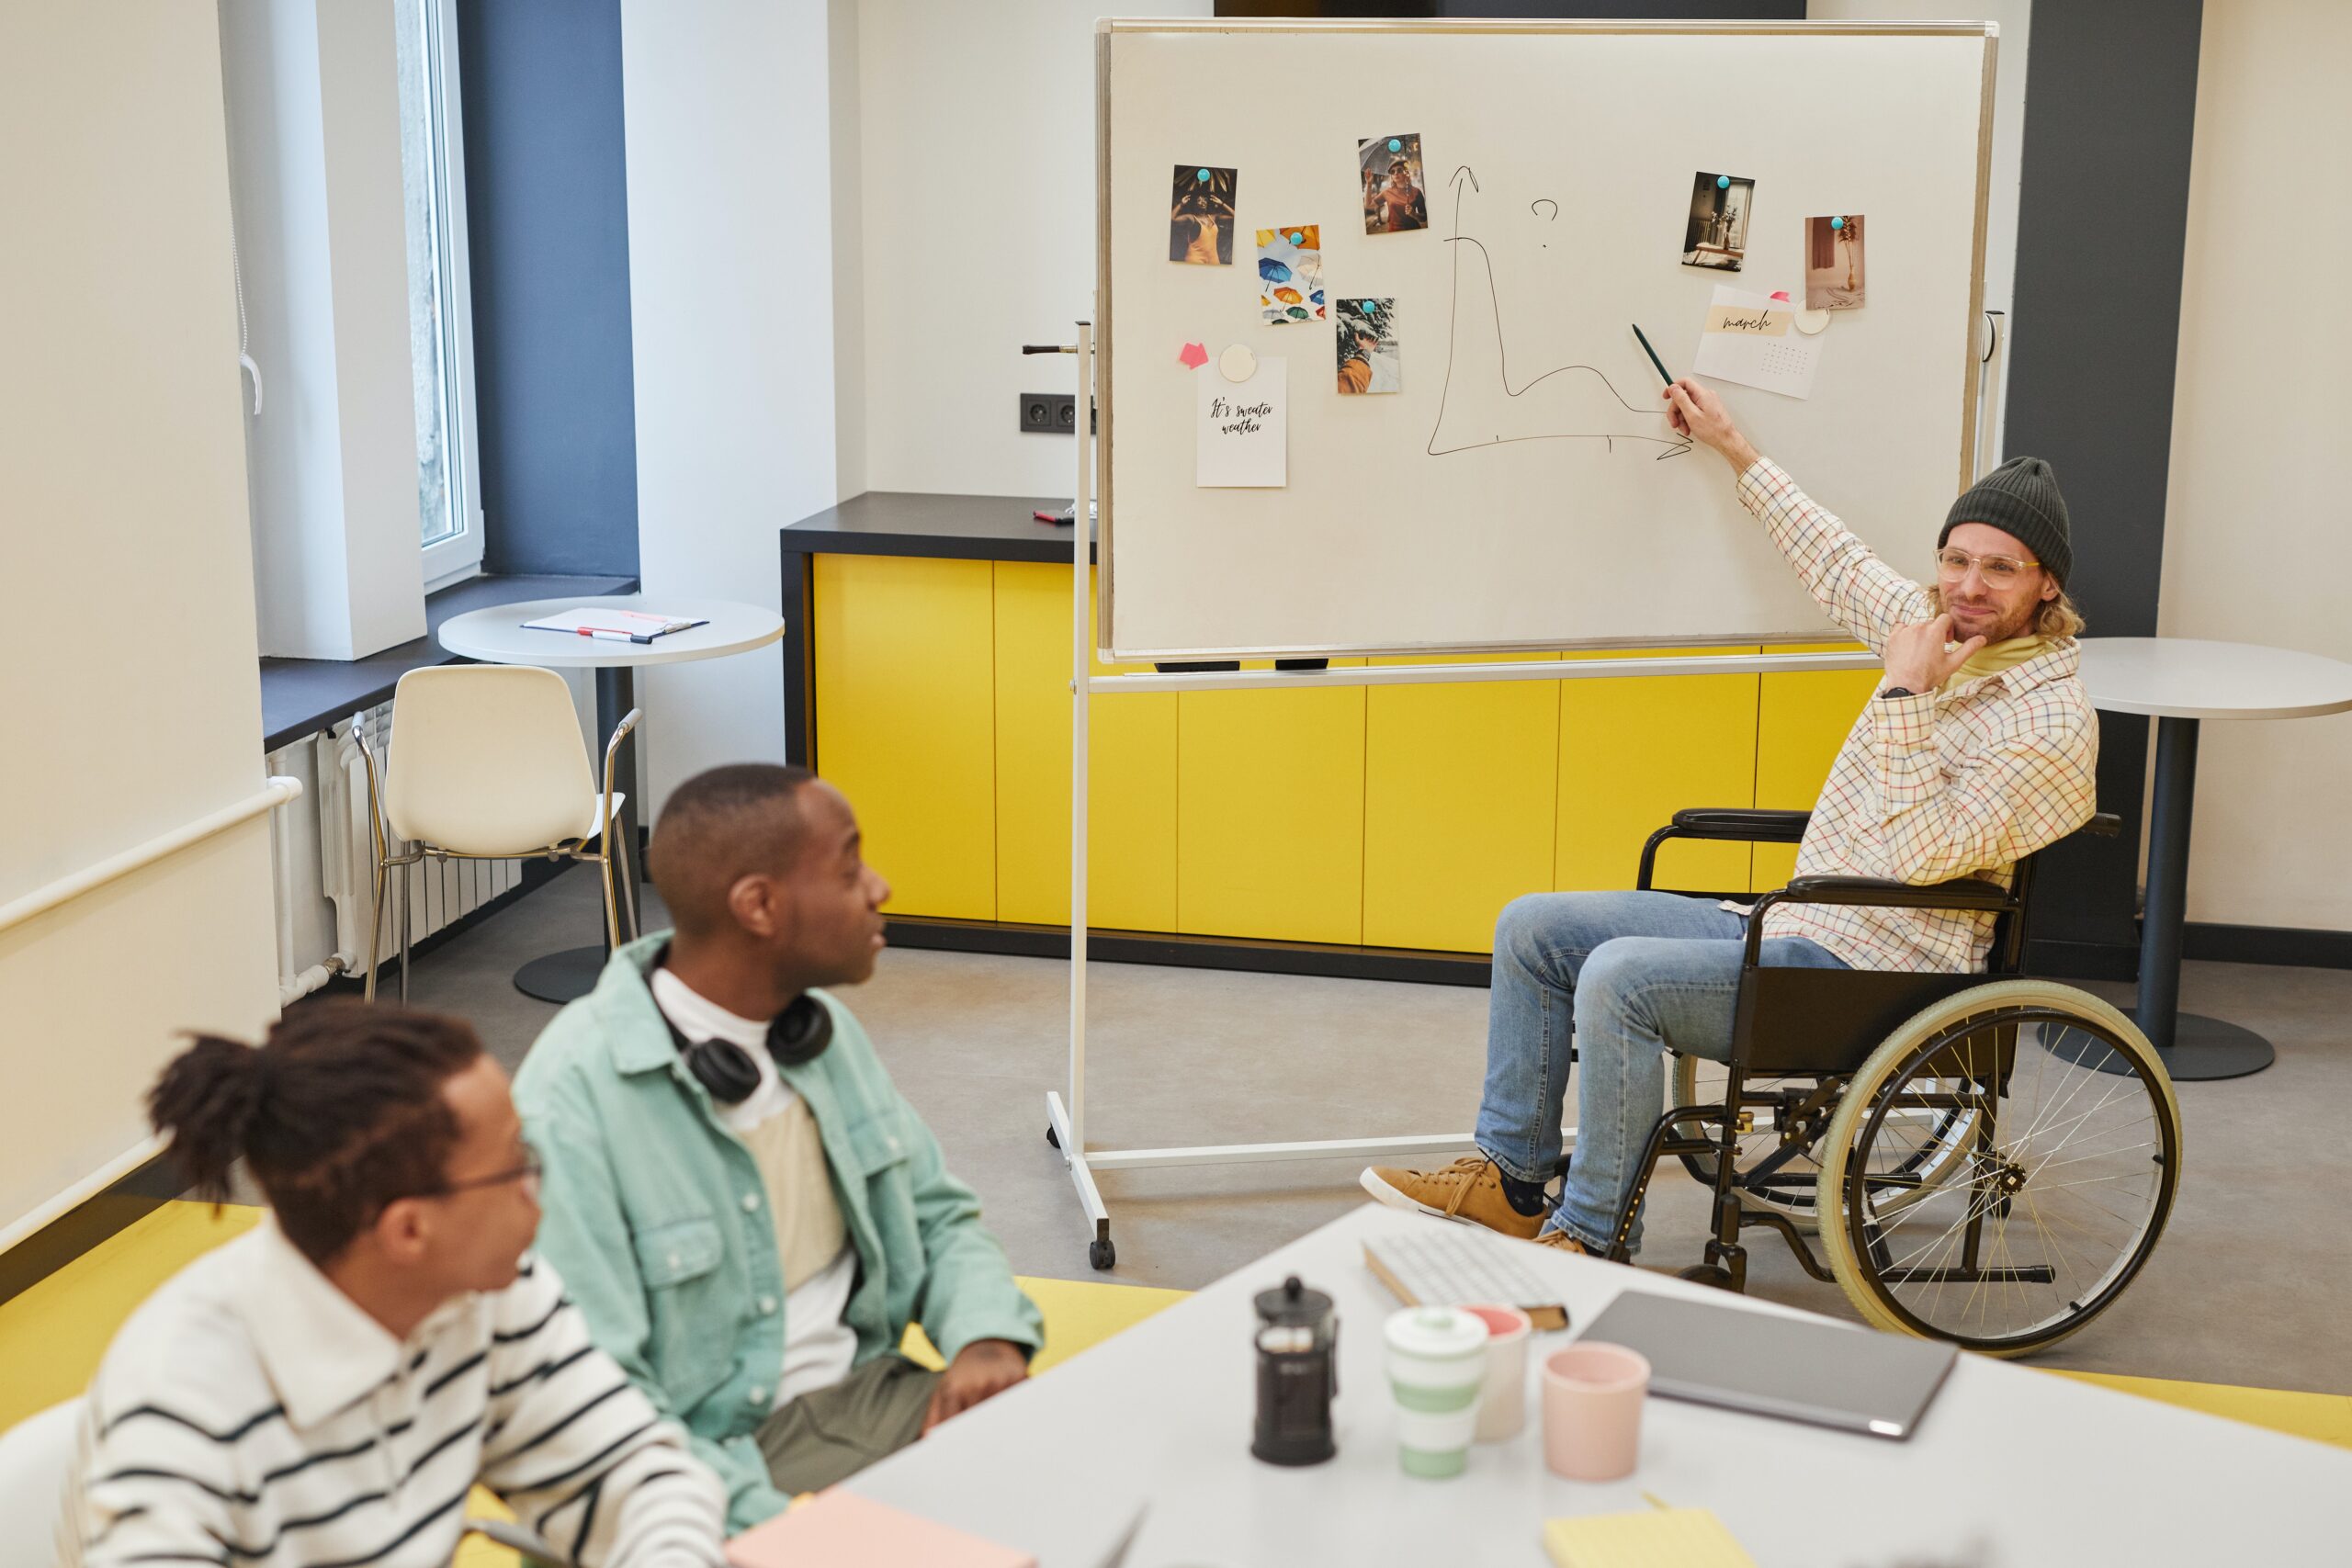 A person in a wheelchair points at a whiteboard while two people look on from their desk.